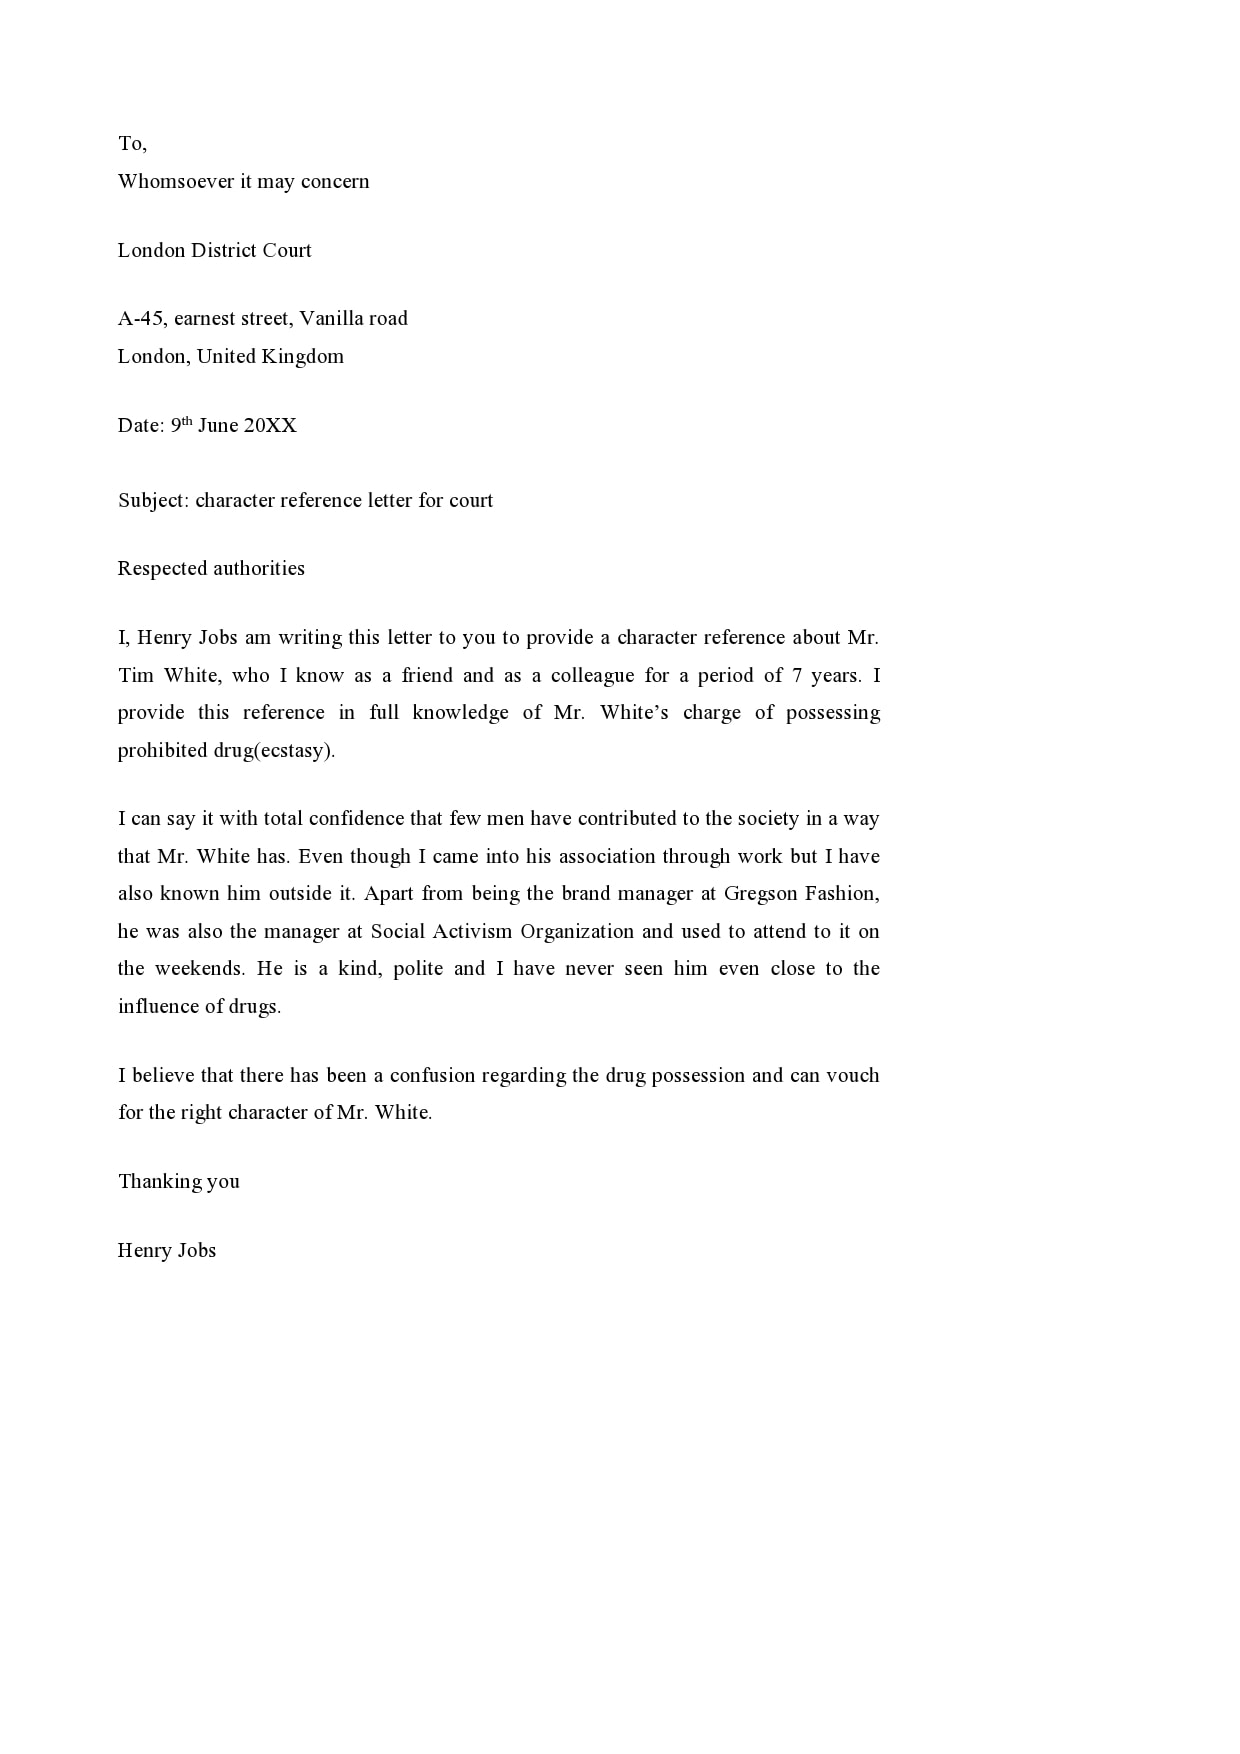 Example Of Character Reference Letter For A Friend from templatearchive.com